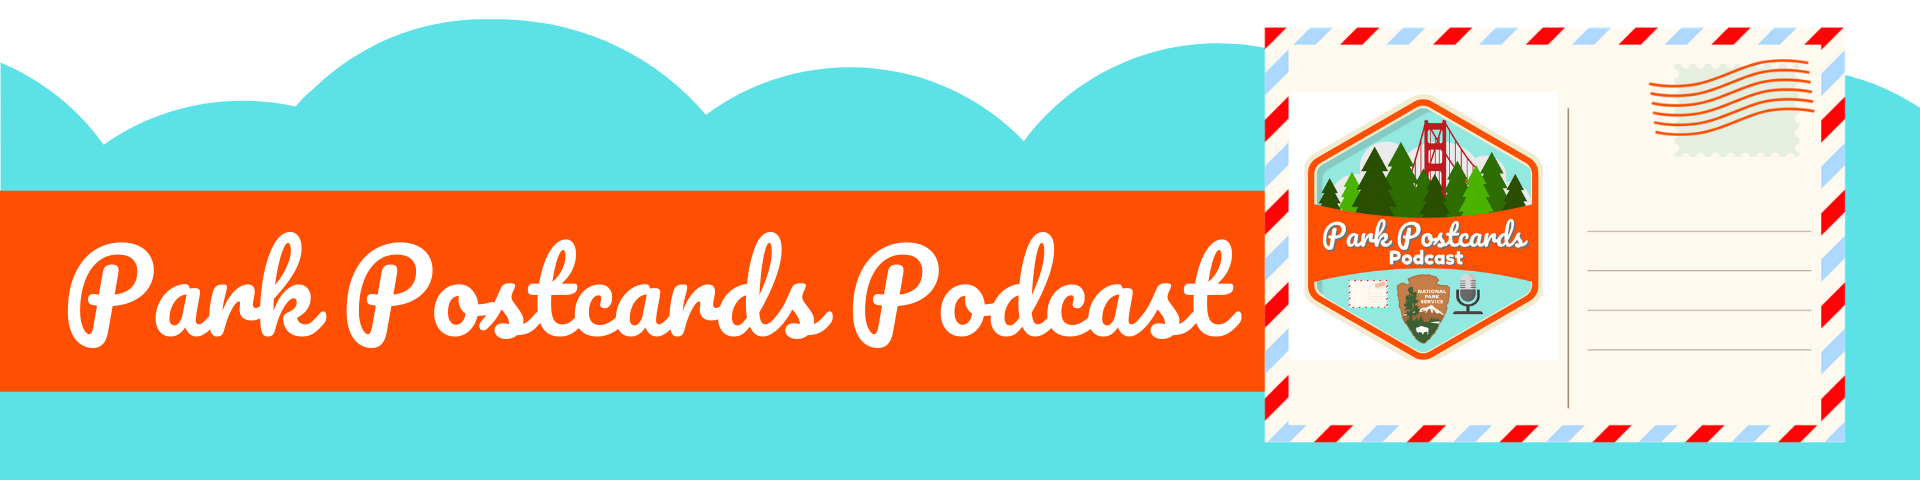 Park Postcards Podcast Logo. Vector image of fog and Golden Gate Bridge behind green trees. Vectors of a postcard and a microphone next to the National Park Service arrowhead logo.